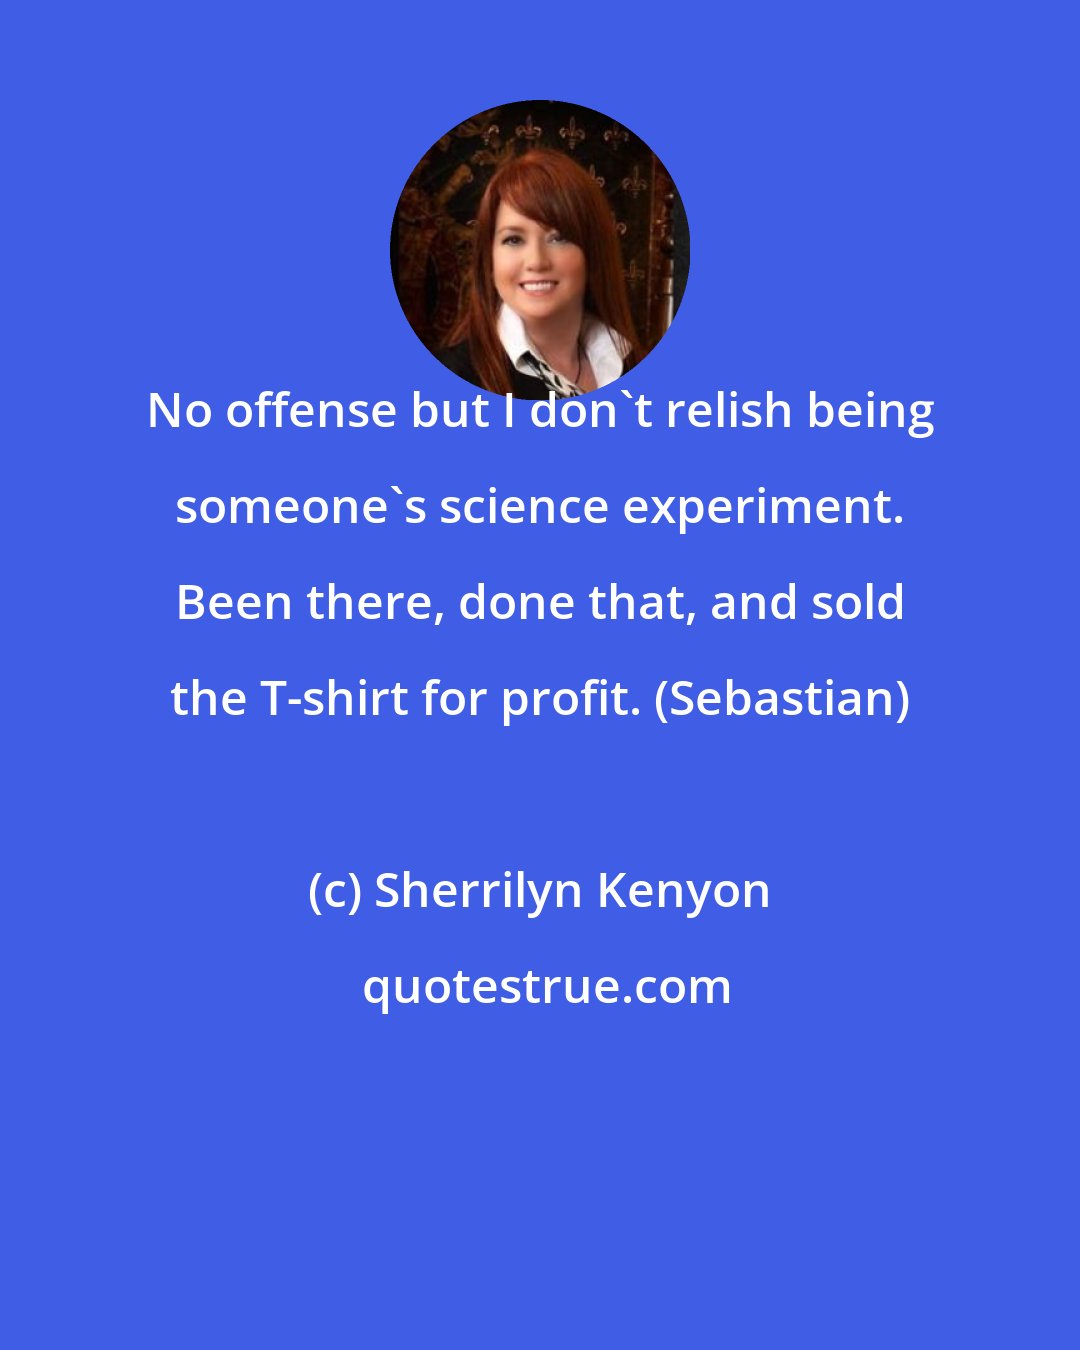 Sherrilyn Kenyon: No offense but I don't relish being someone's science experiment. Been there, done that, and sold the T-shirt for profit. (Sebastian)